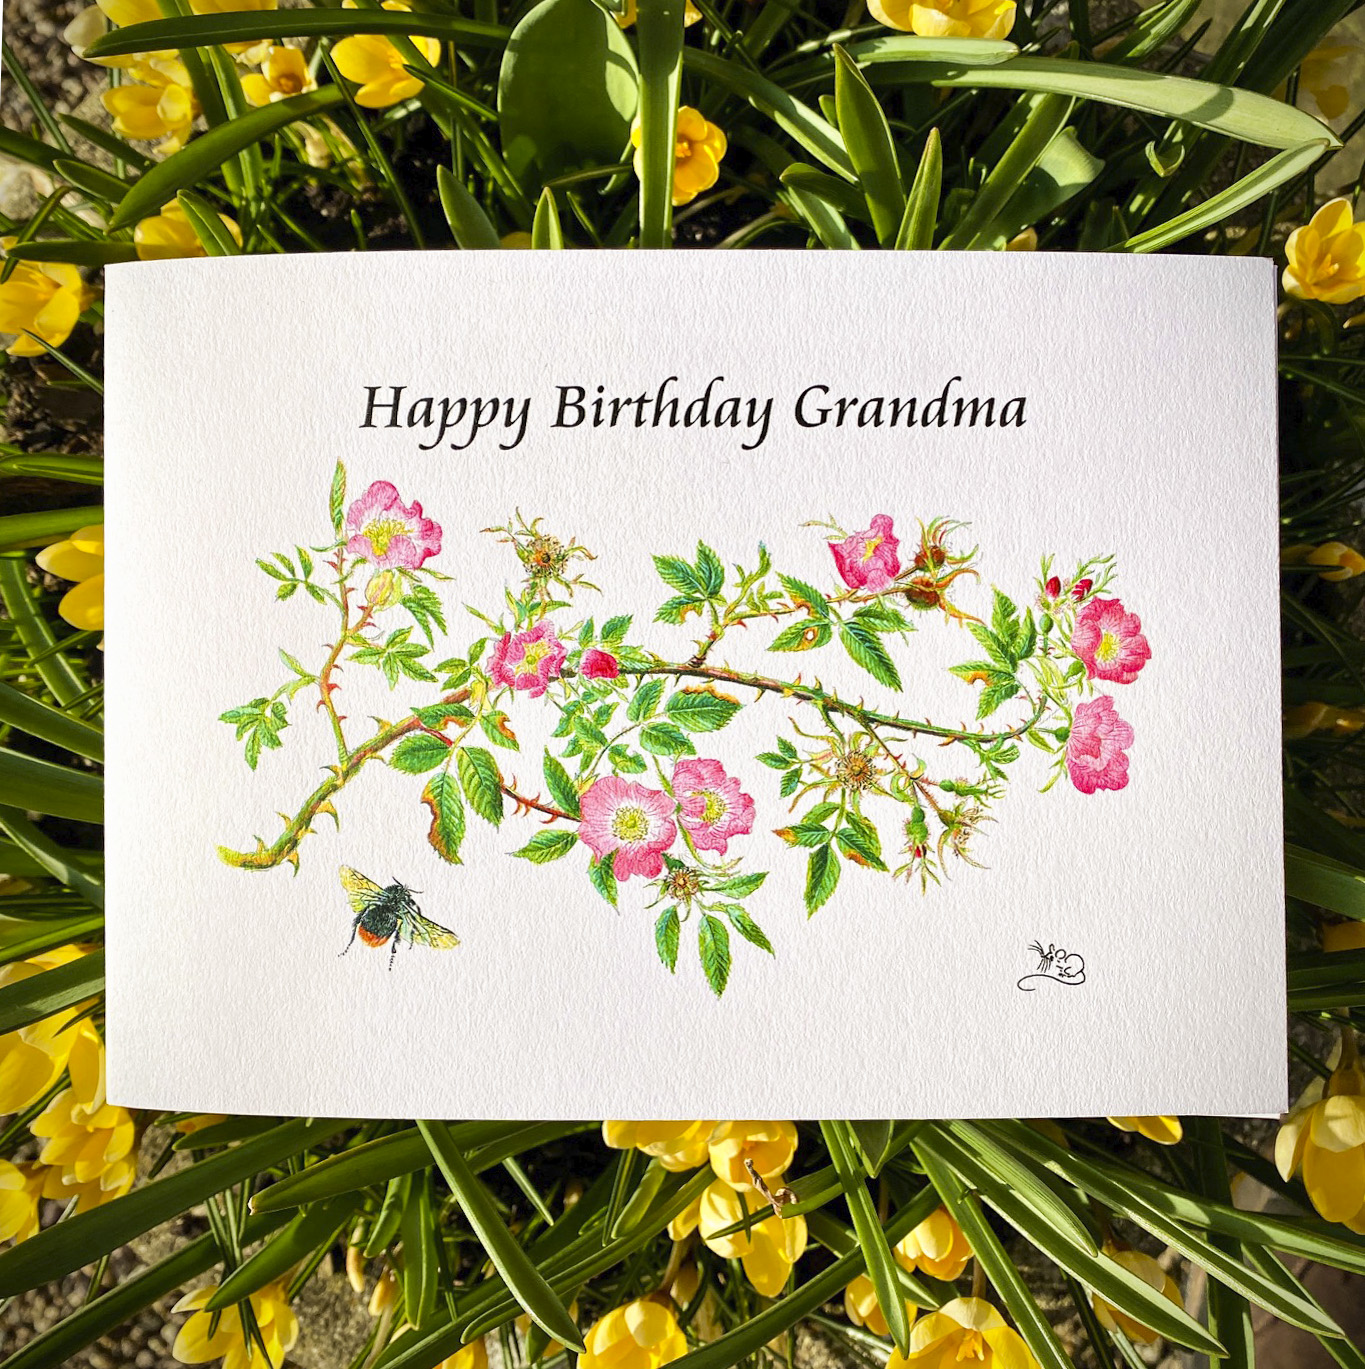 Happy Birthday grandma, greetings card, card, garndmum, grandmother, Nan, Granny, wild rose, dog rose, red tailed bumble bee, Mouse, Mouse Macpherson, wildlifebymouse,